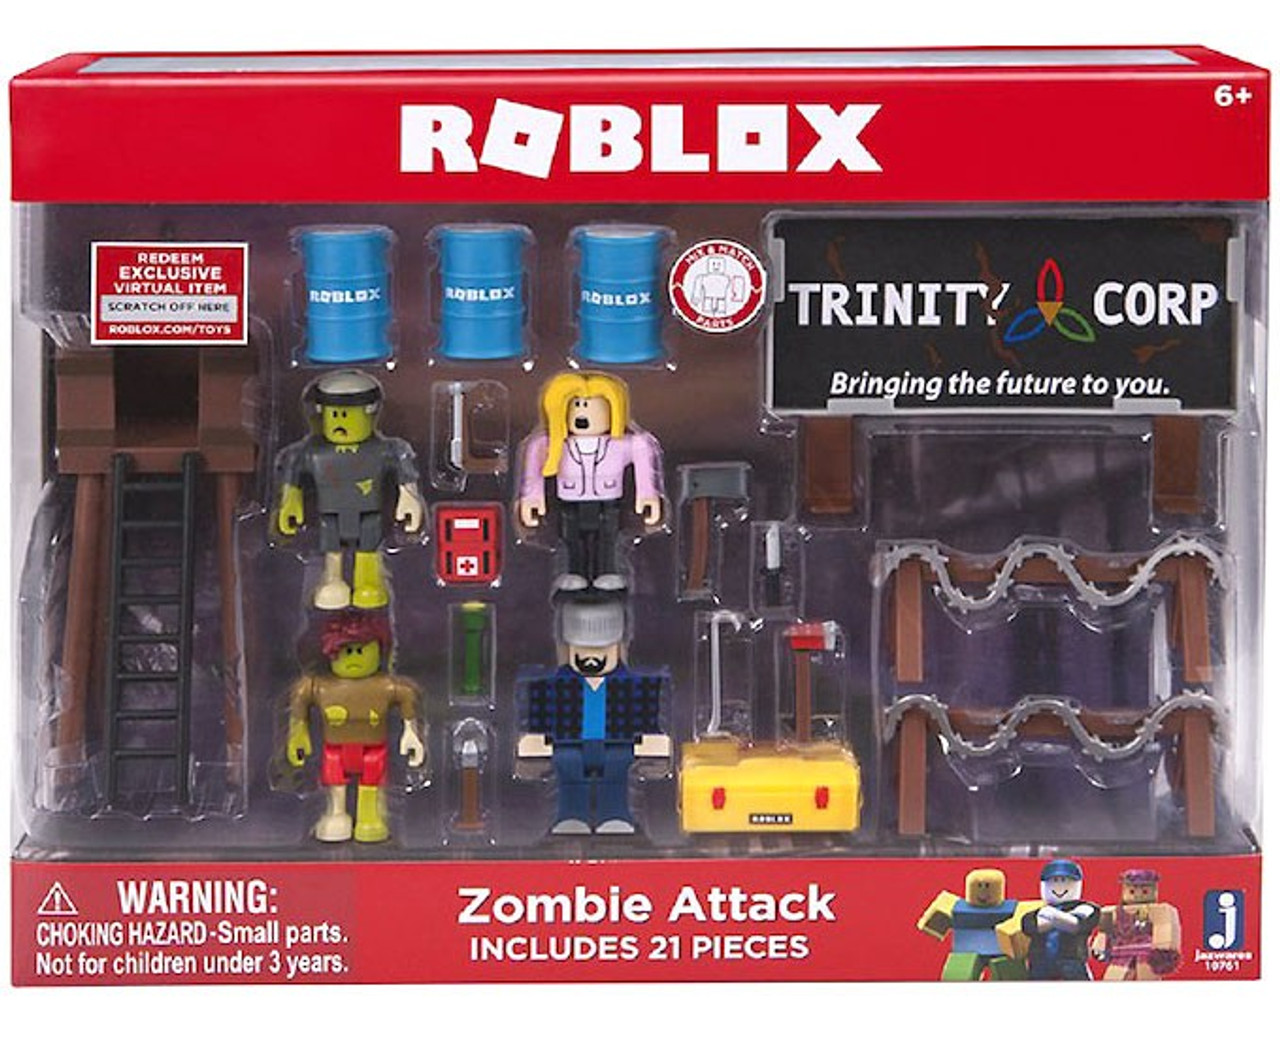 Roblox Zombie Attack 3 Playset Random Box Same Contents Damaged Package Jazwares Toywiz - roblox walkthrough alien vs zombie attack zombie rush by